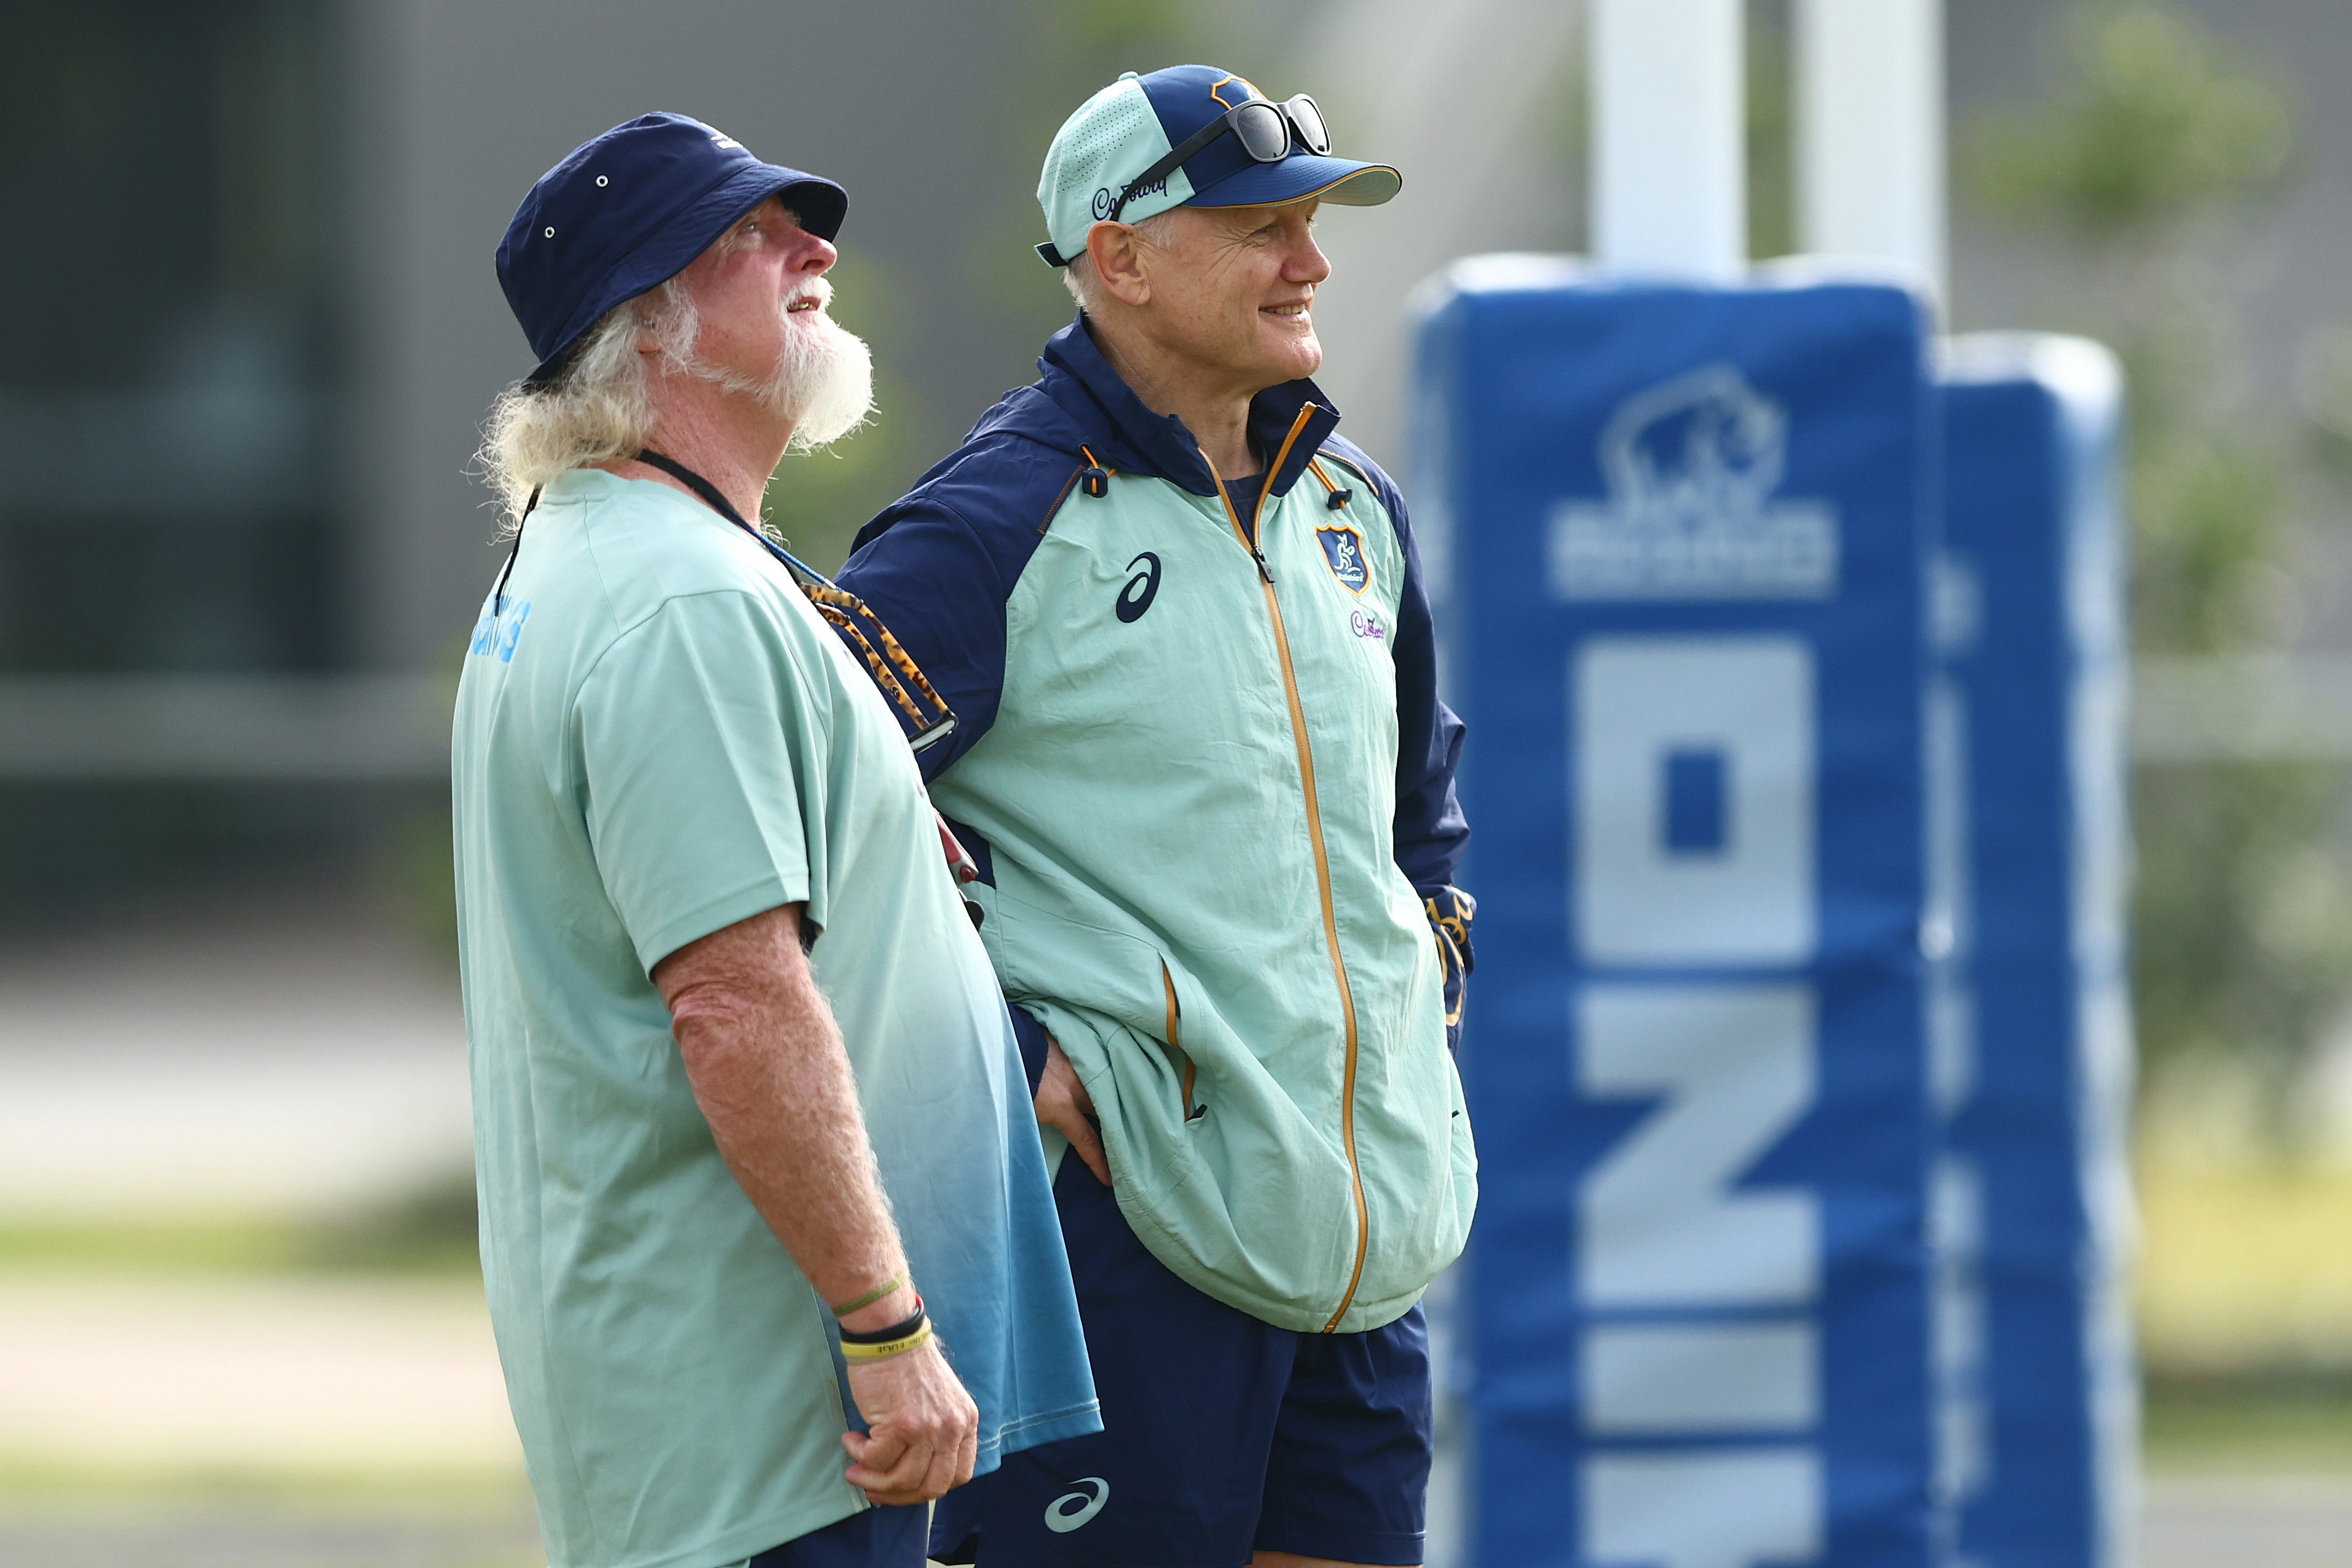 Joe Schmidt and Laurie Fisher talk during a Wallabies training session at Ballymore Stadium.